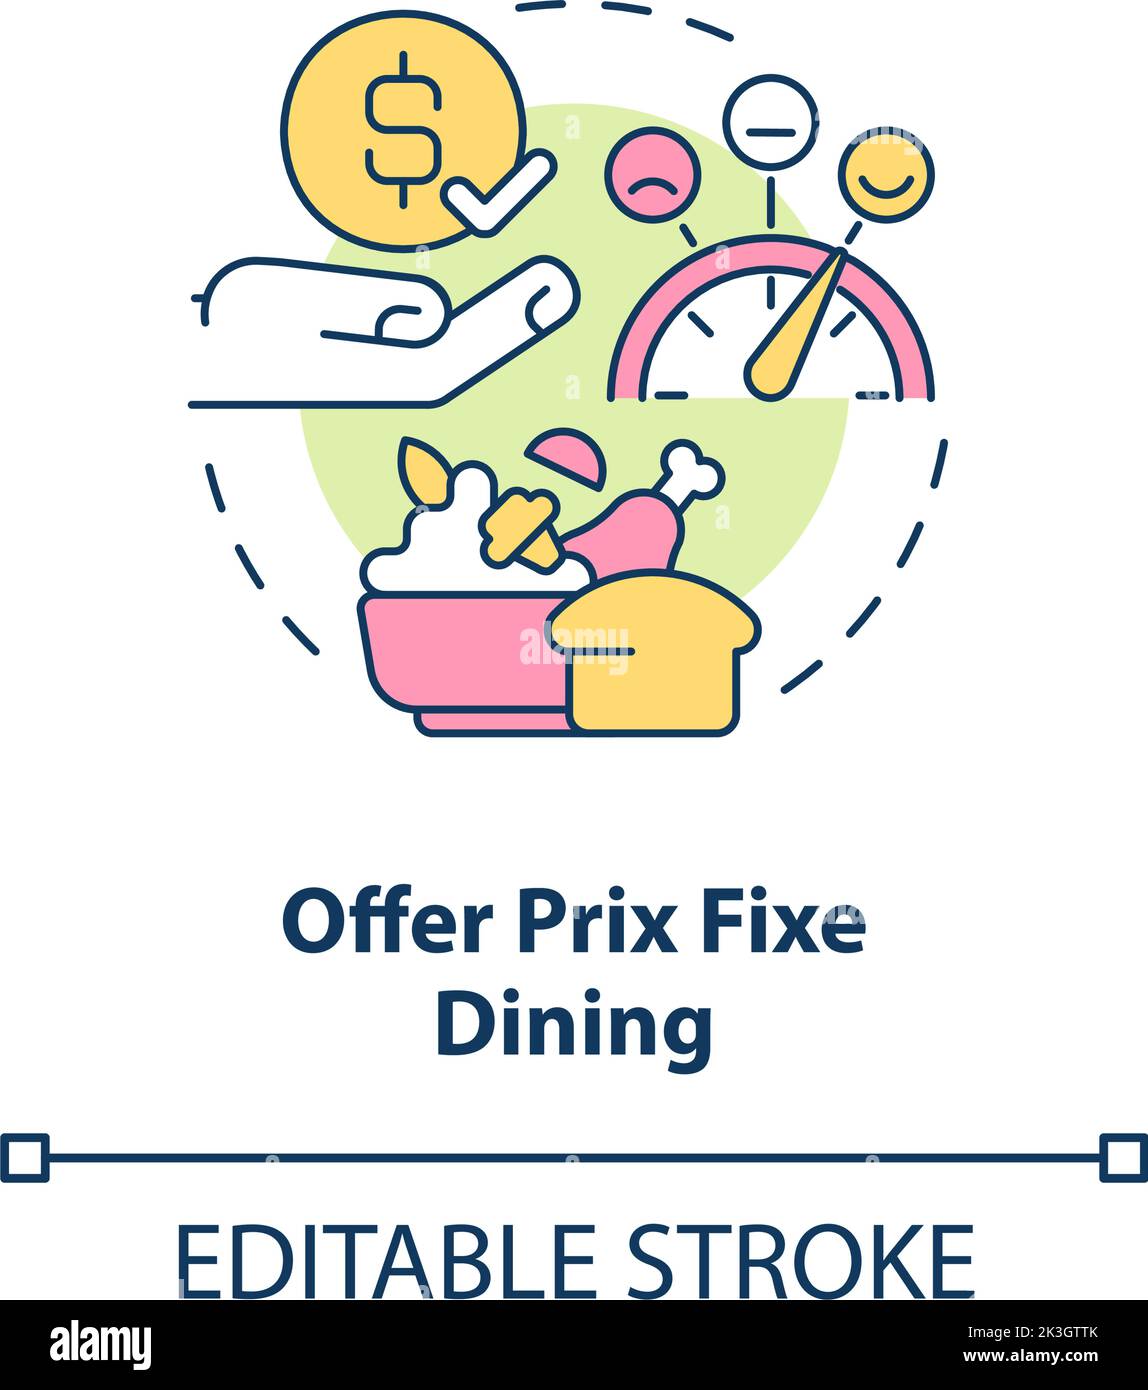 Offer prix fixe dining concept icon Stock Vector